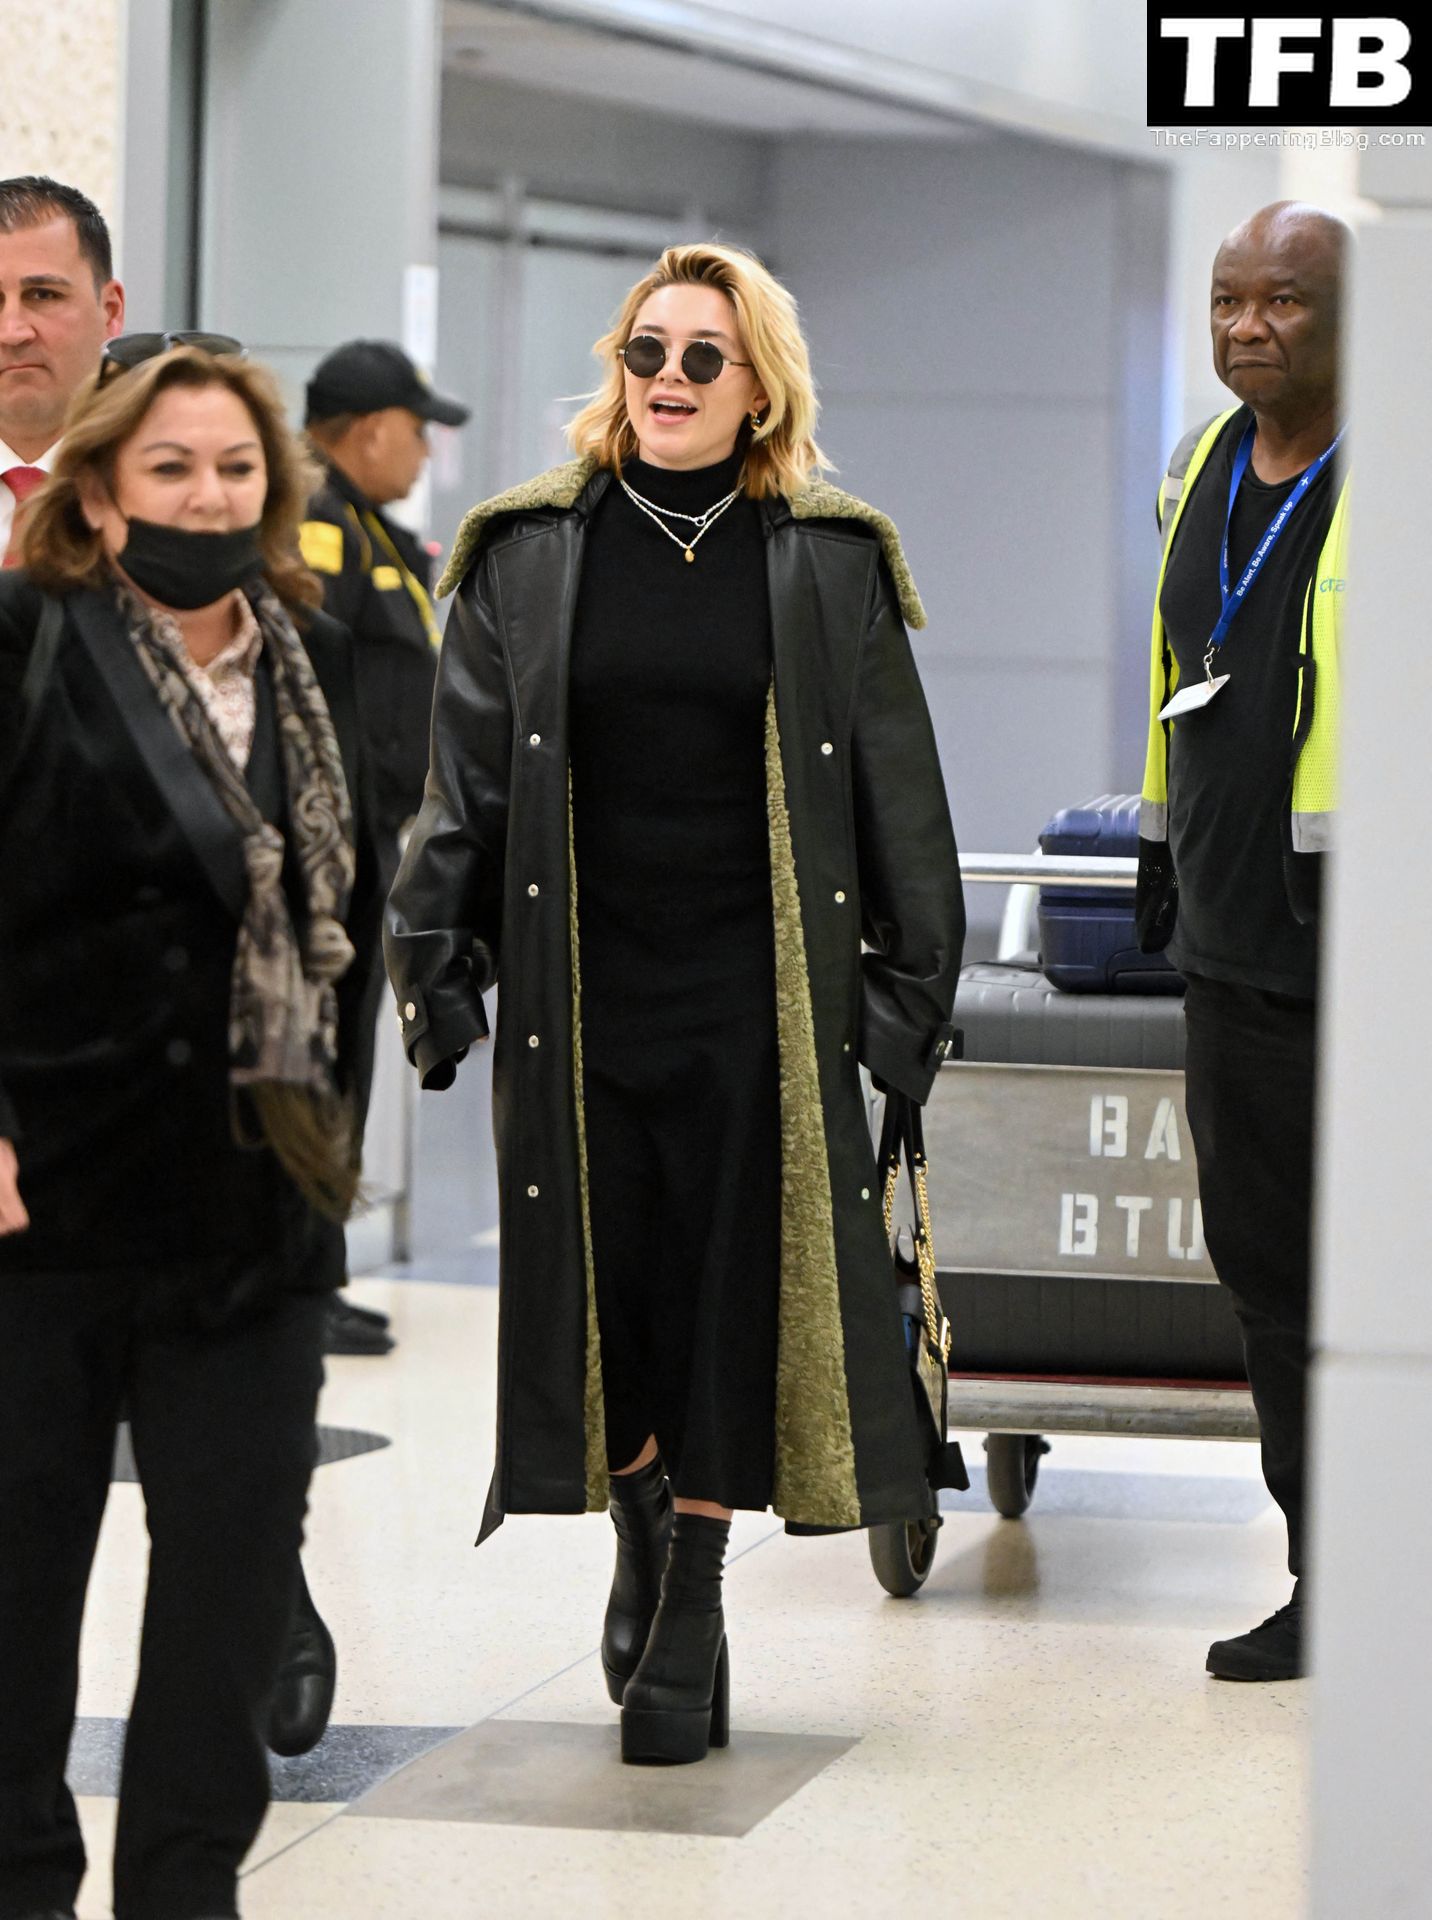 Florence Pugh Pokies The Fappening Blog 8 - Florence Pugh Shows Off Her Pokies at JFK airport in NYC (31 Photos)